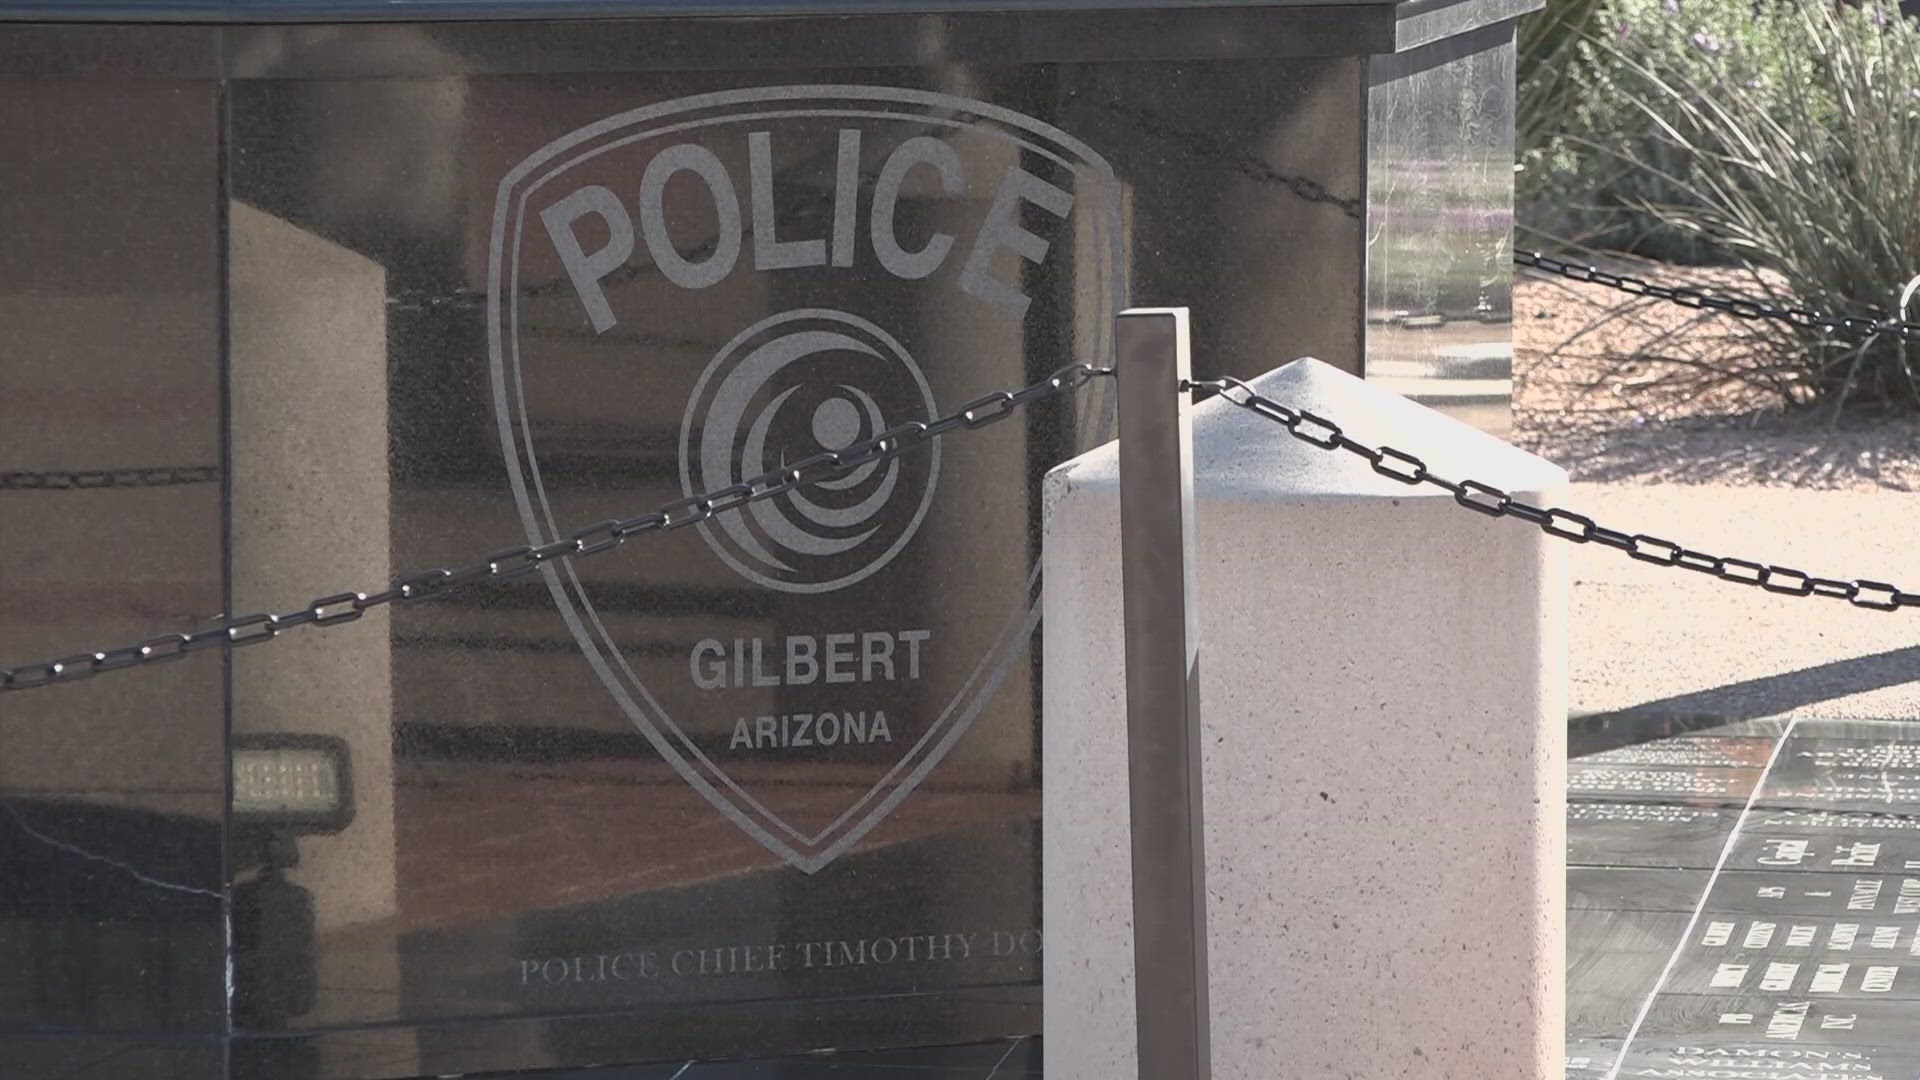 The Gilbert Police Department has made a total of 35 arrests involving incidents of teen violence, including 22 arrests in the last month.